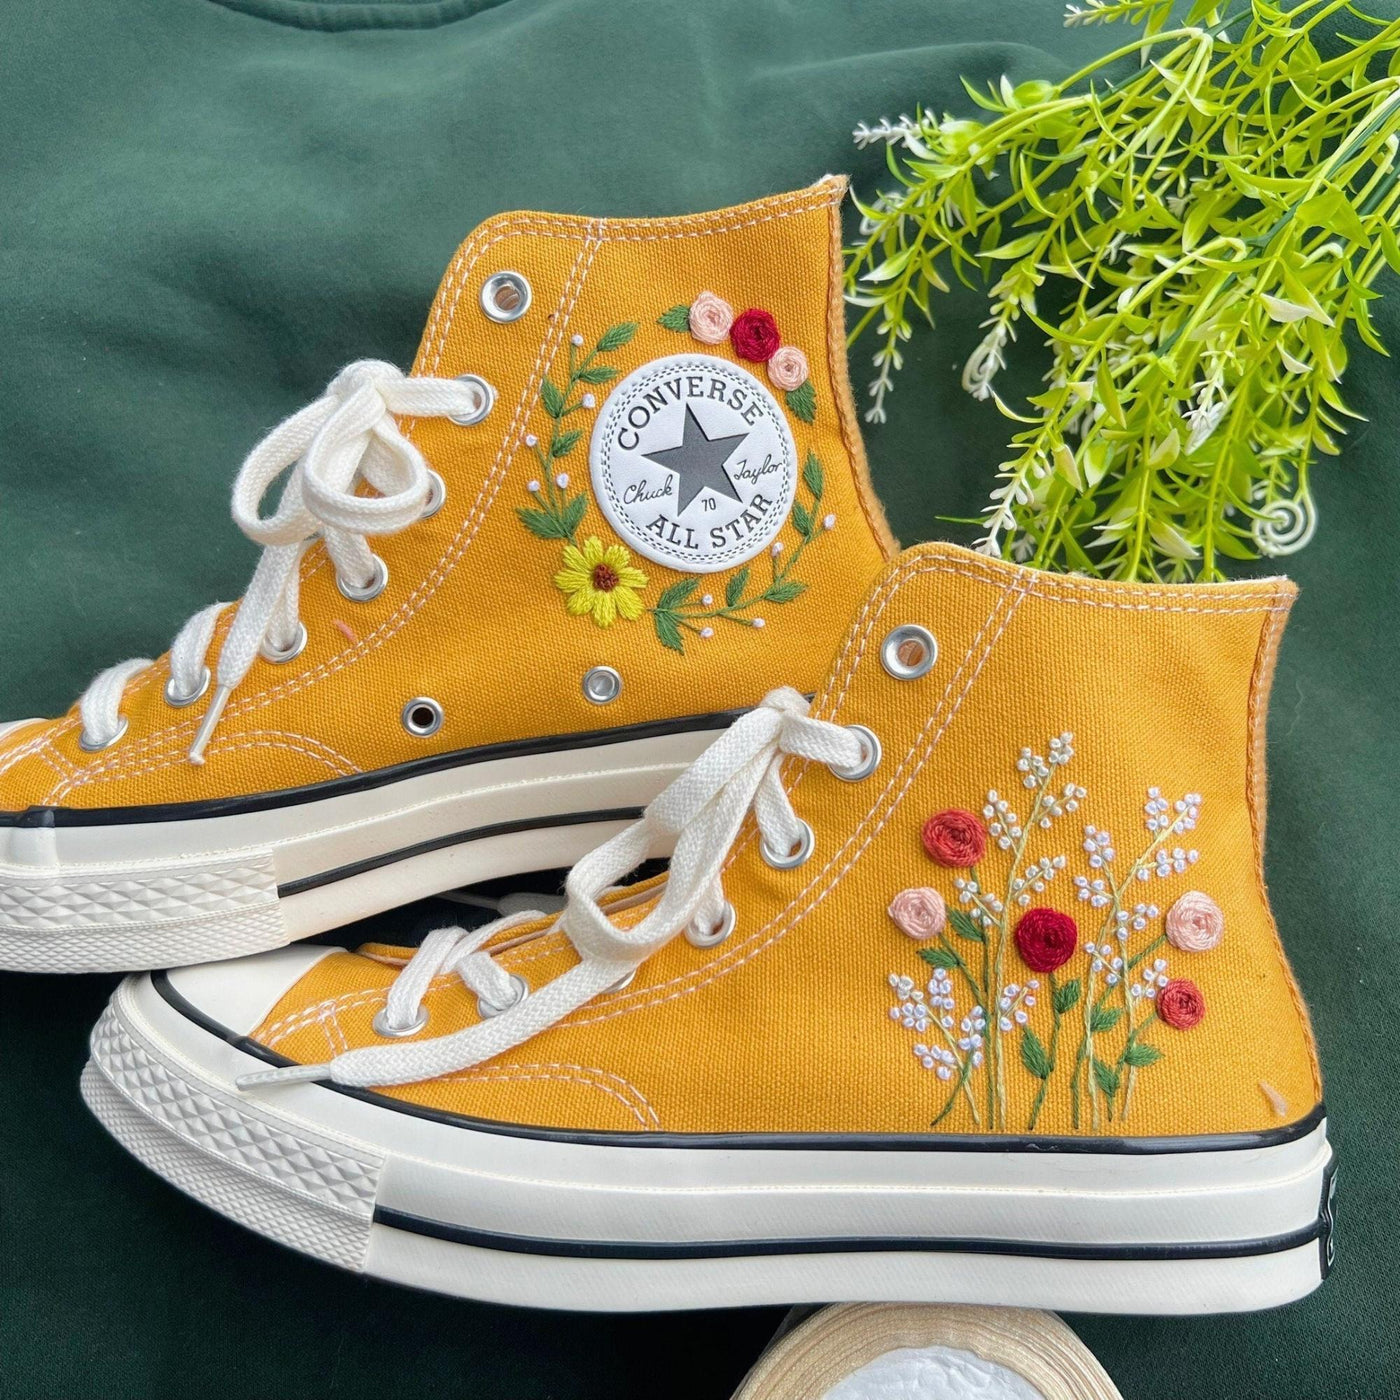 Custom Converse,High Tops,Embroidered Sweet Rose And Lavender Garden